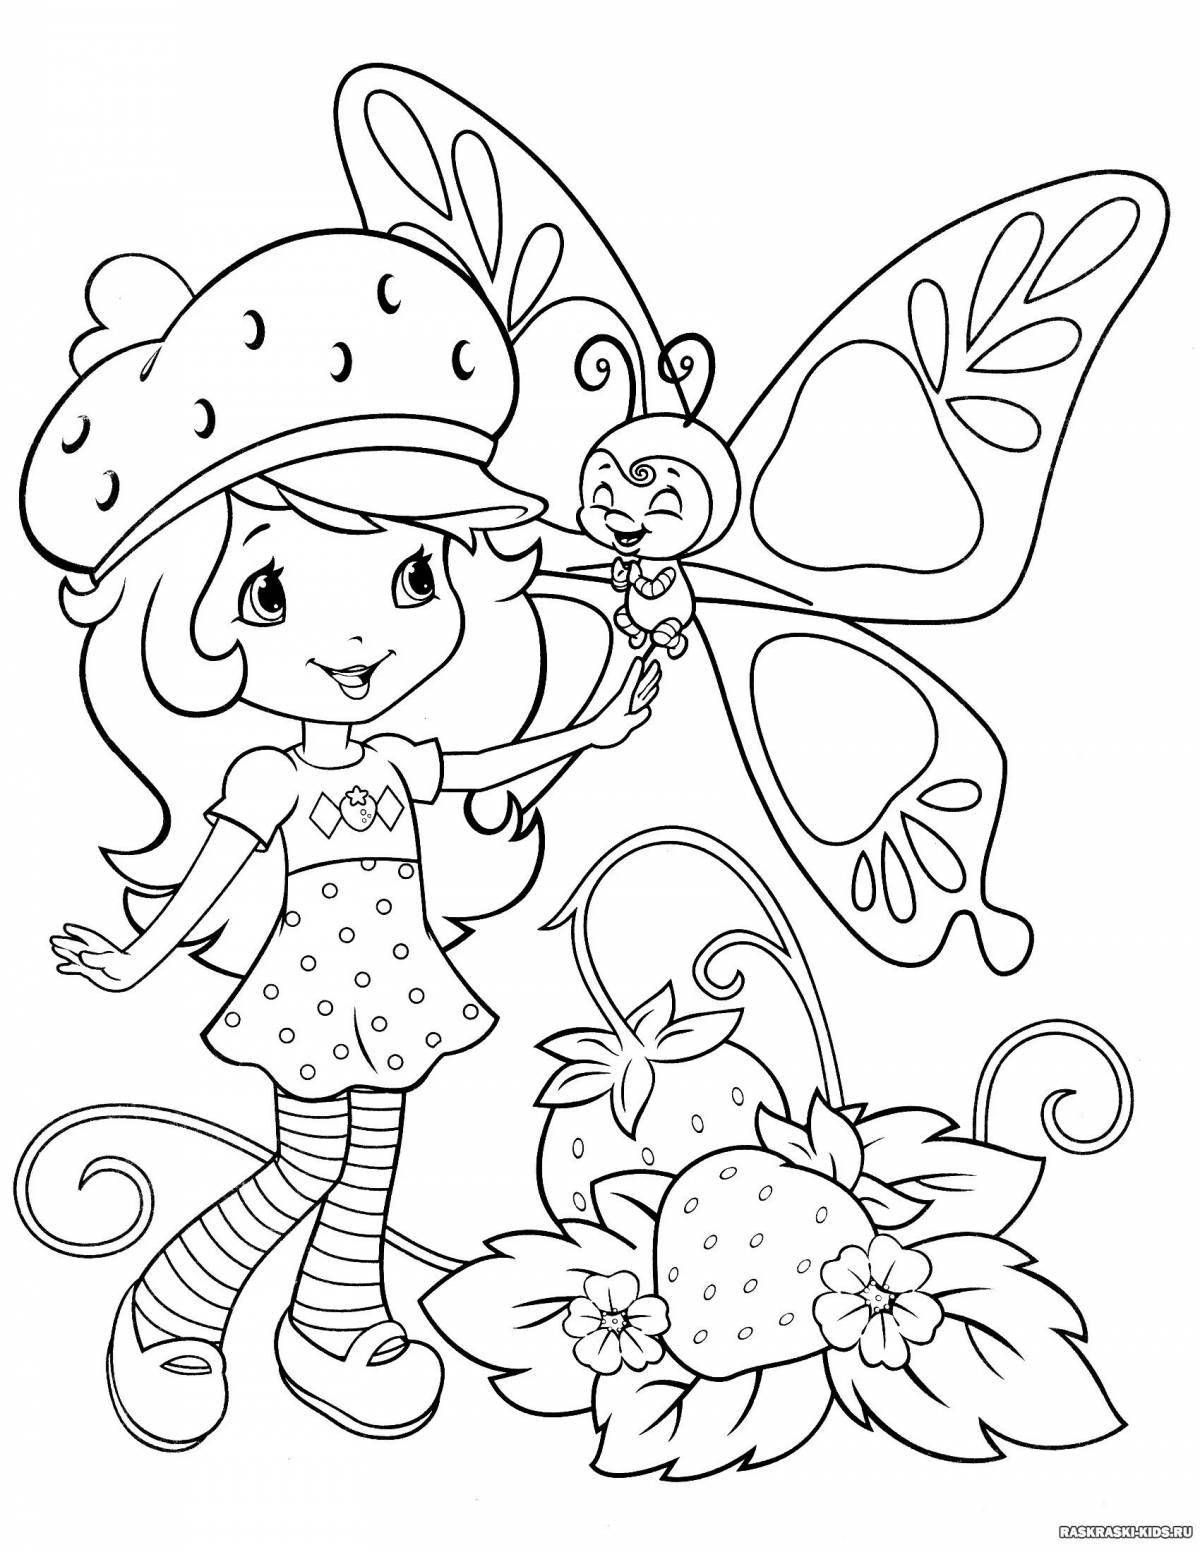 Coloring book for girls